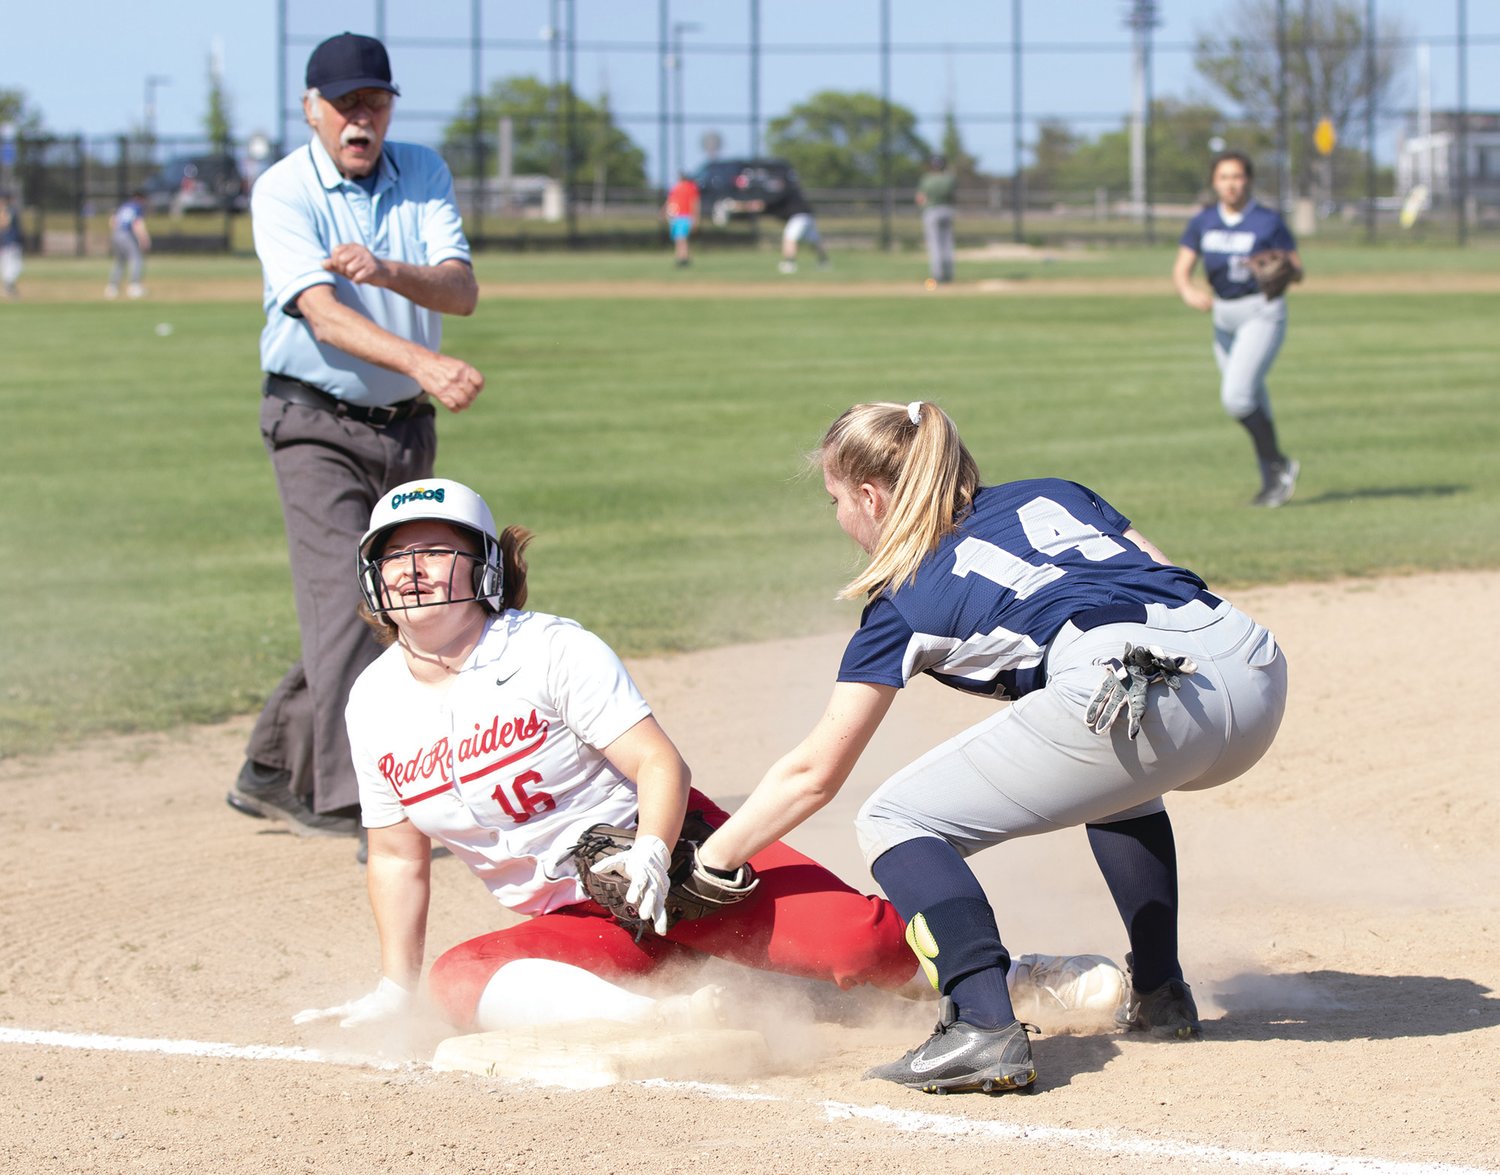 Quincy Sullivan tags a girl out at third to end the inning against Barnstable